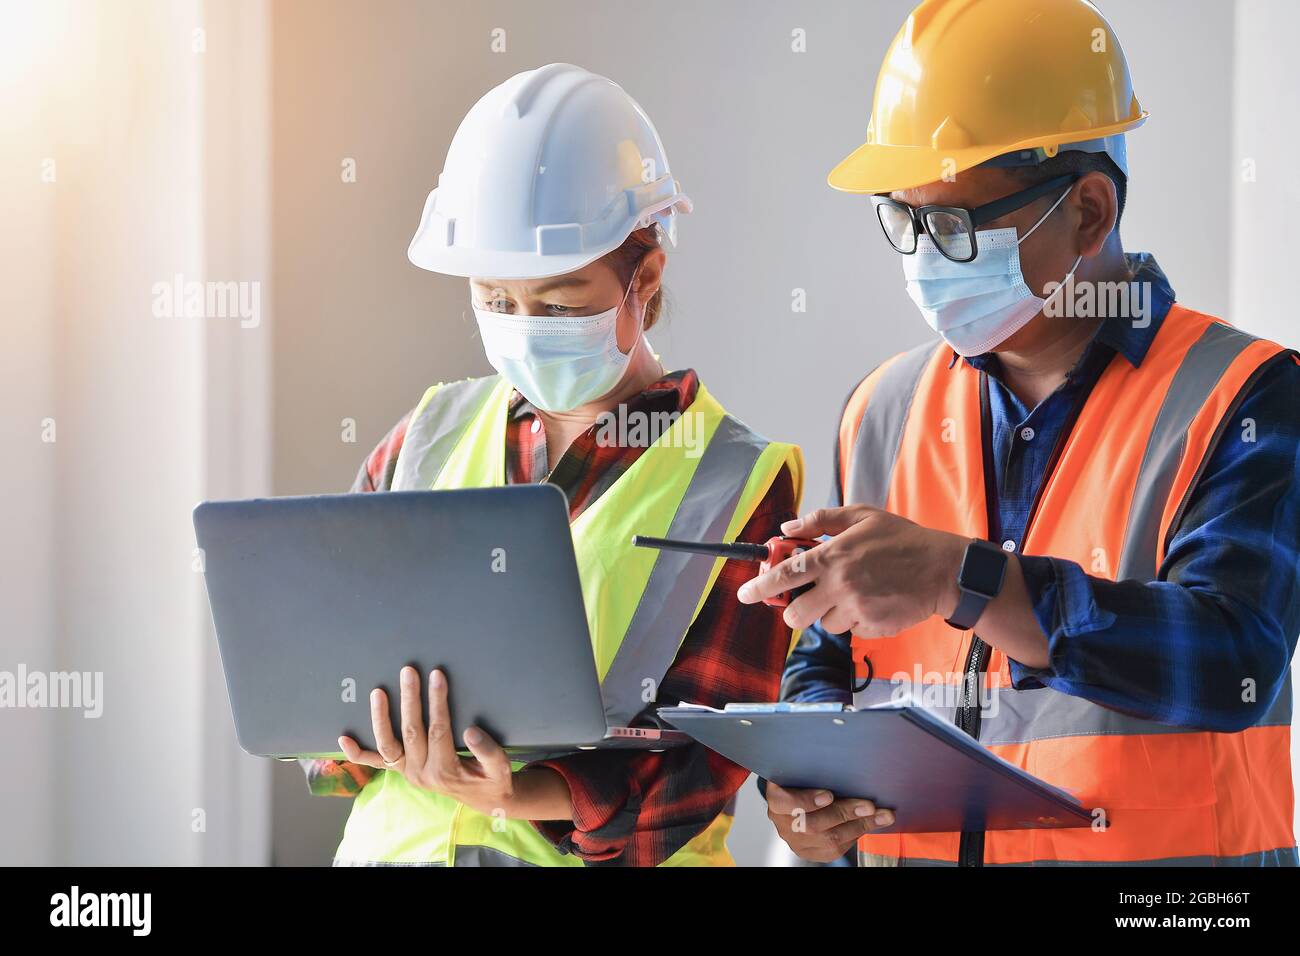 Two architects standing in an office looking at a laptop Stock Photo